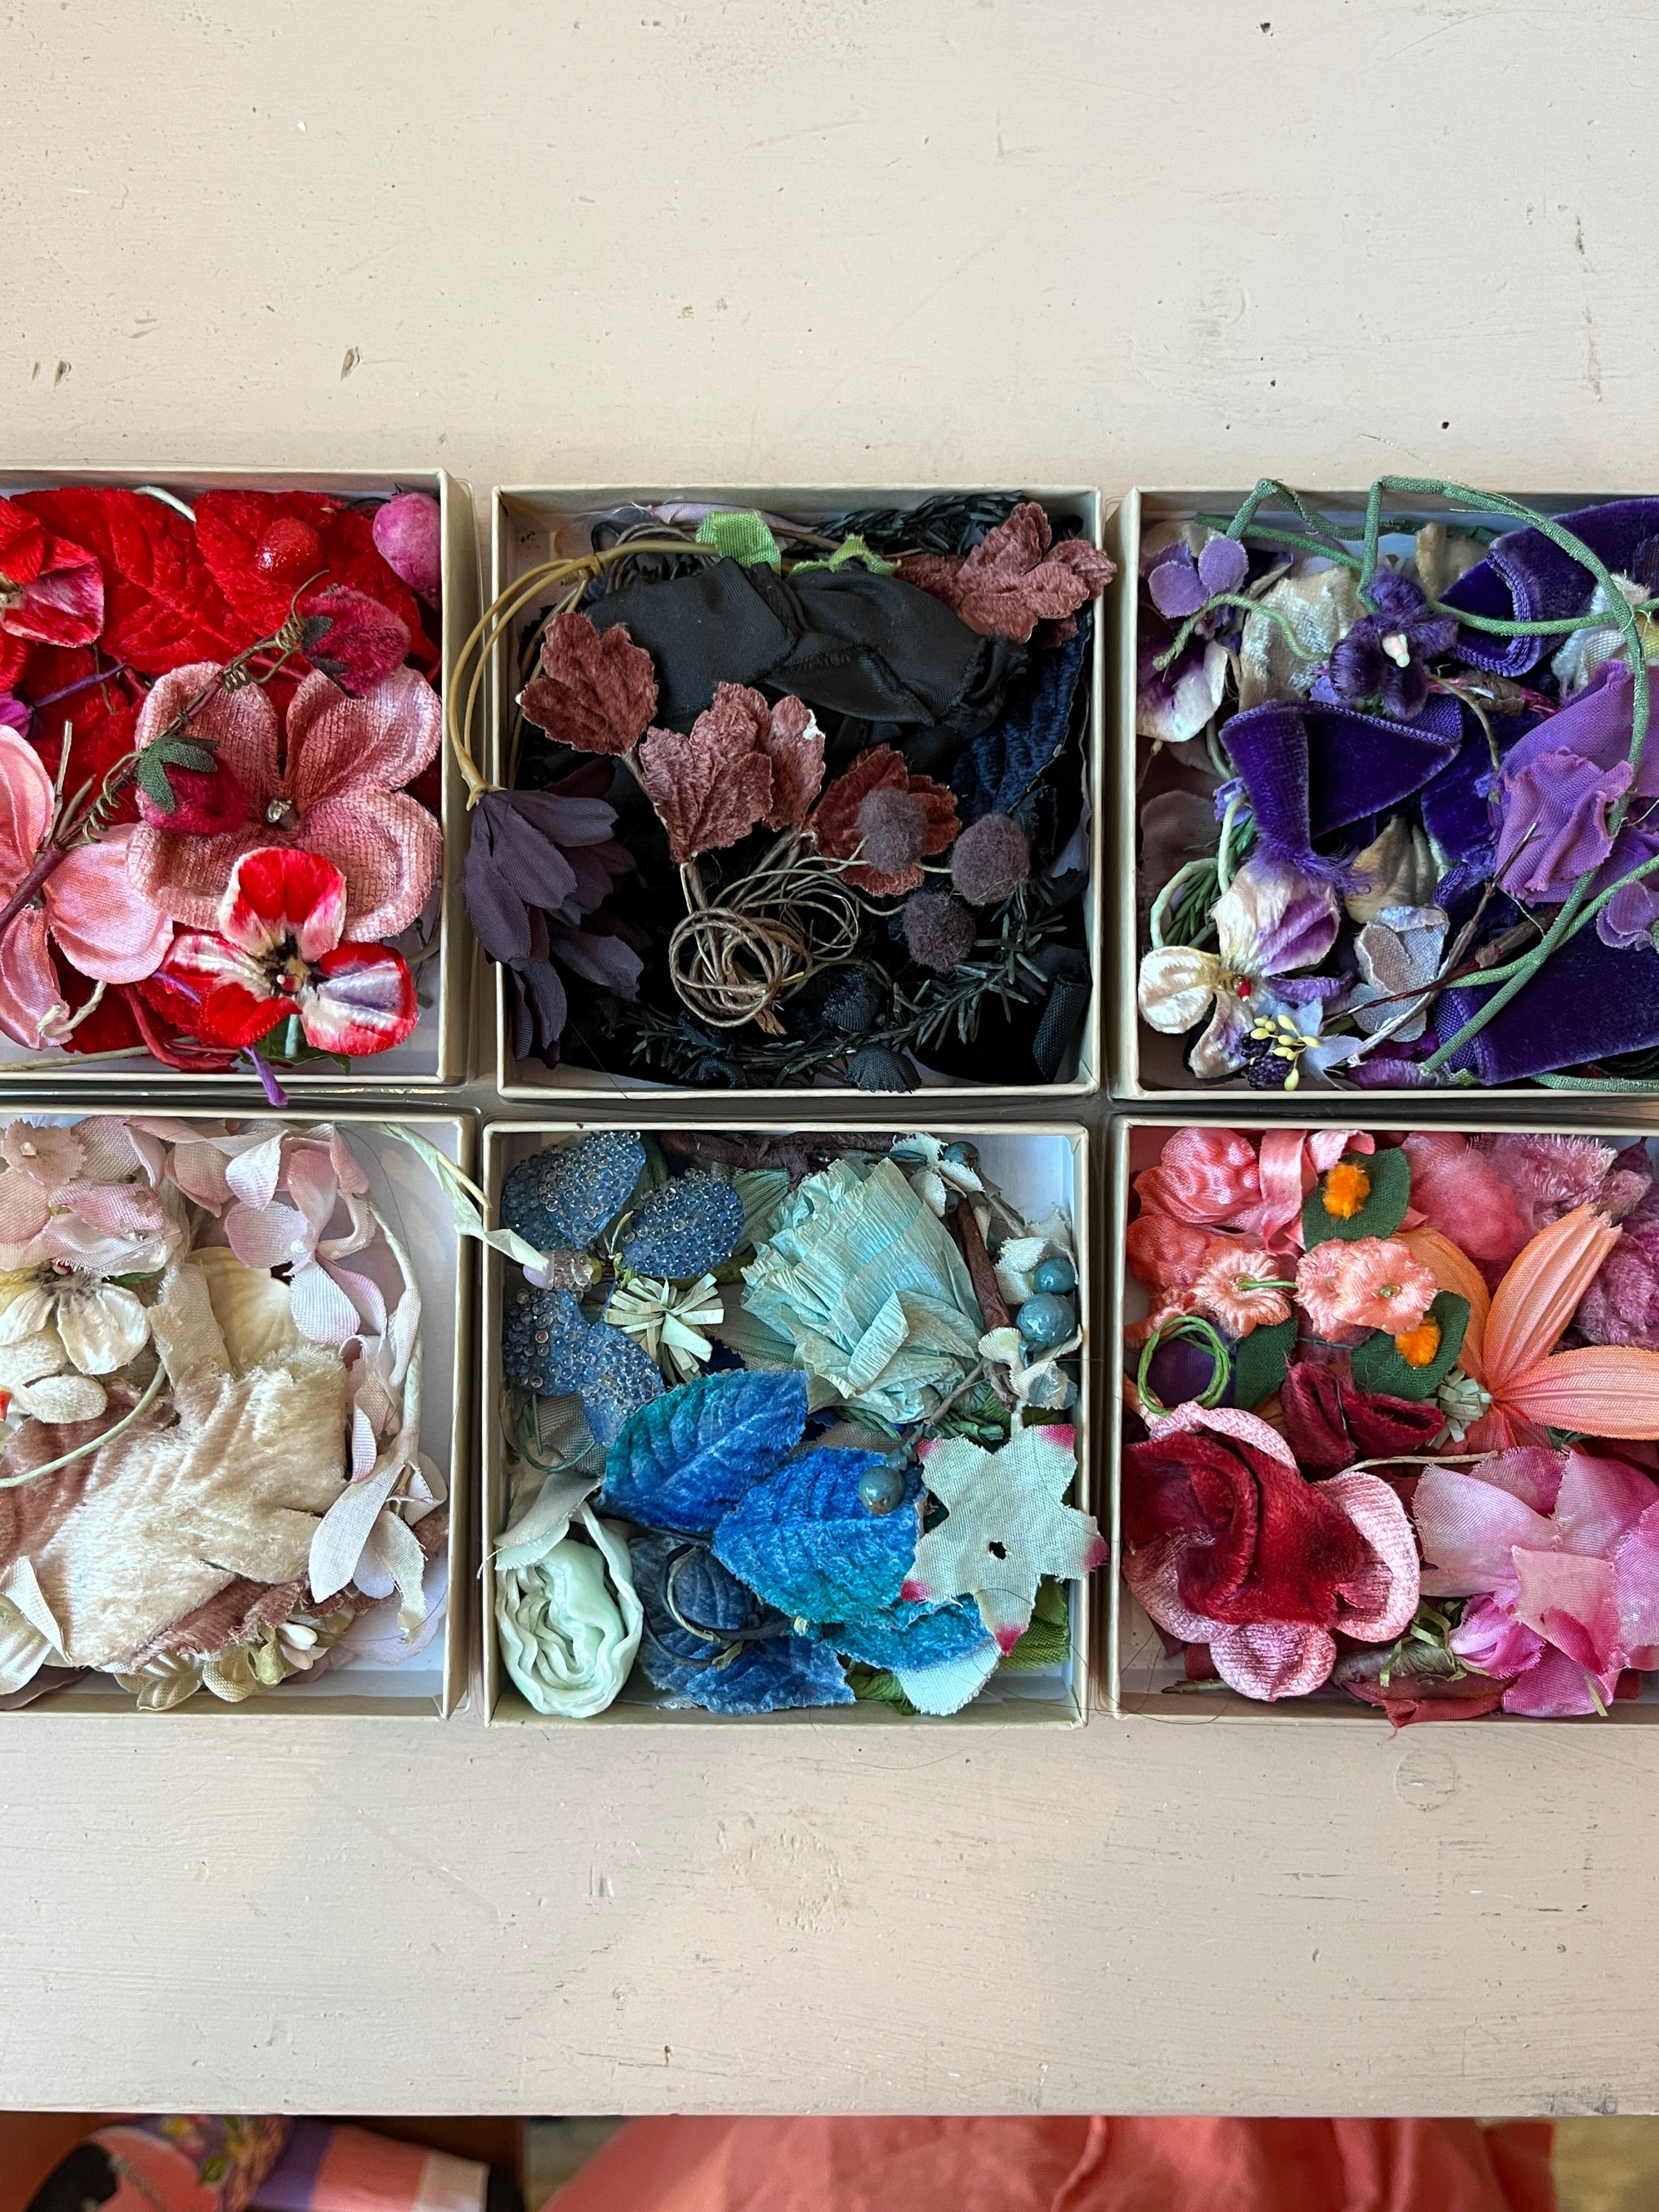 Wholesale Best Selling DIY Craft Dry Pressed Real Flower Dried Pressed  Flowers - China Dried Pressed Flowers and Dried Flowers for Resin price